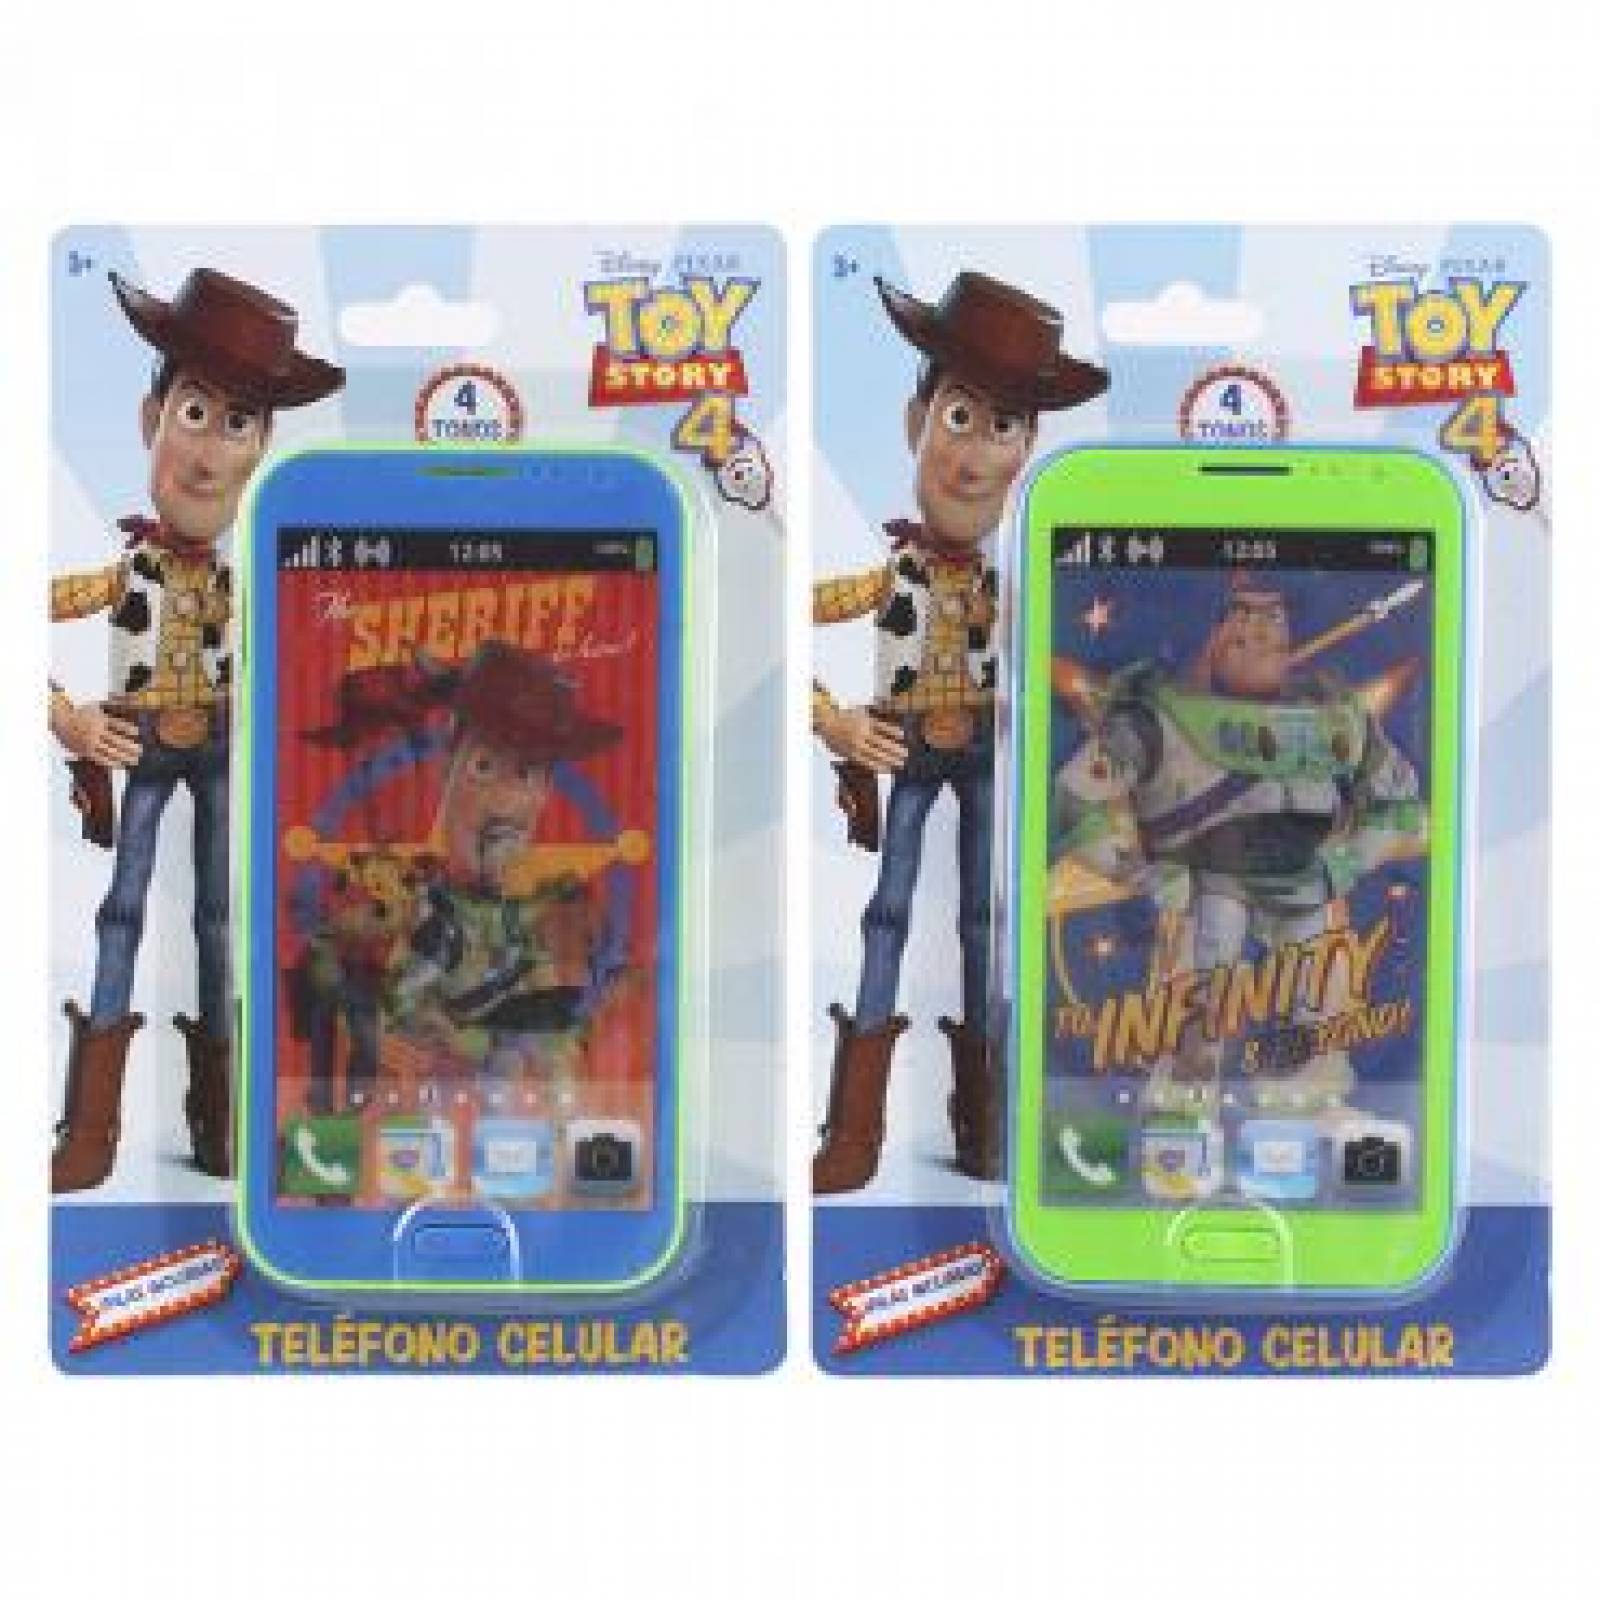 Iphone con Sonido Toy story